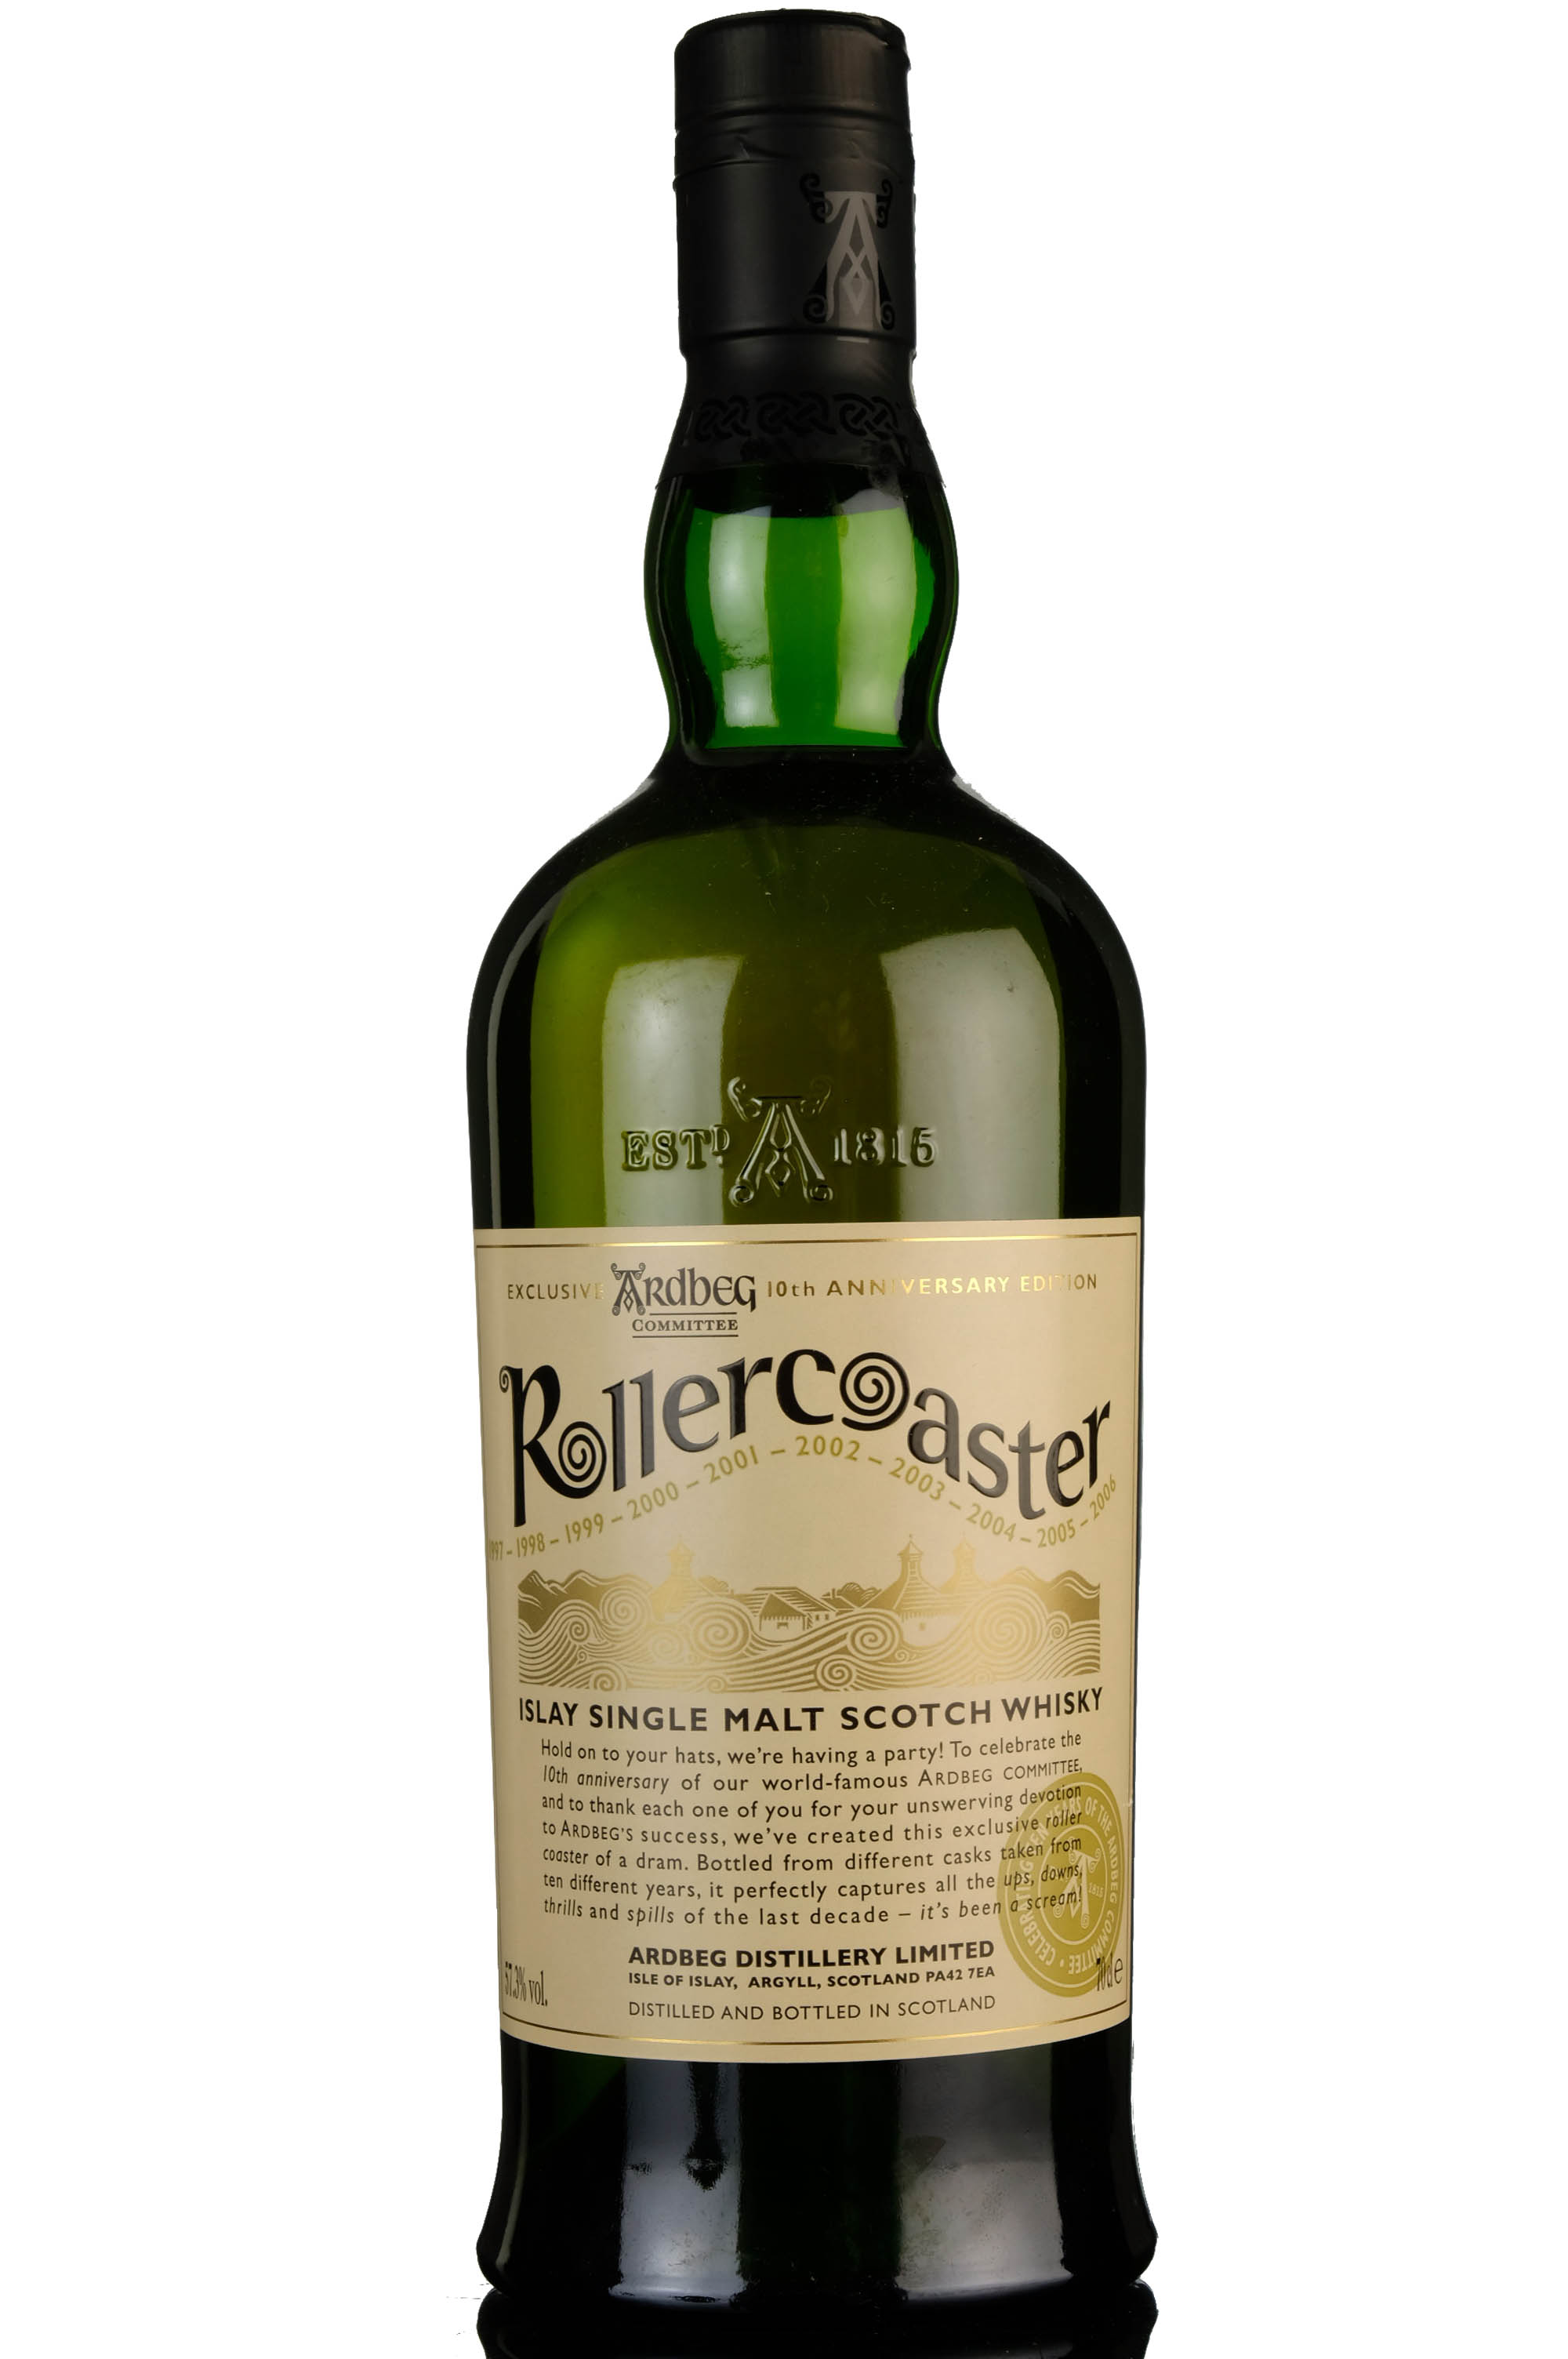 Ardbeg Rollercoaster - Exclusive Committee 10th Anniversary Edition 2010